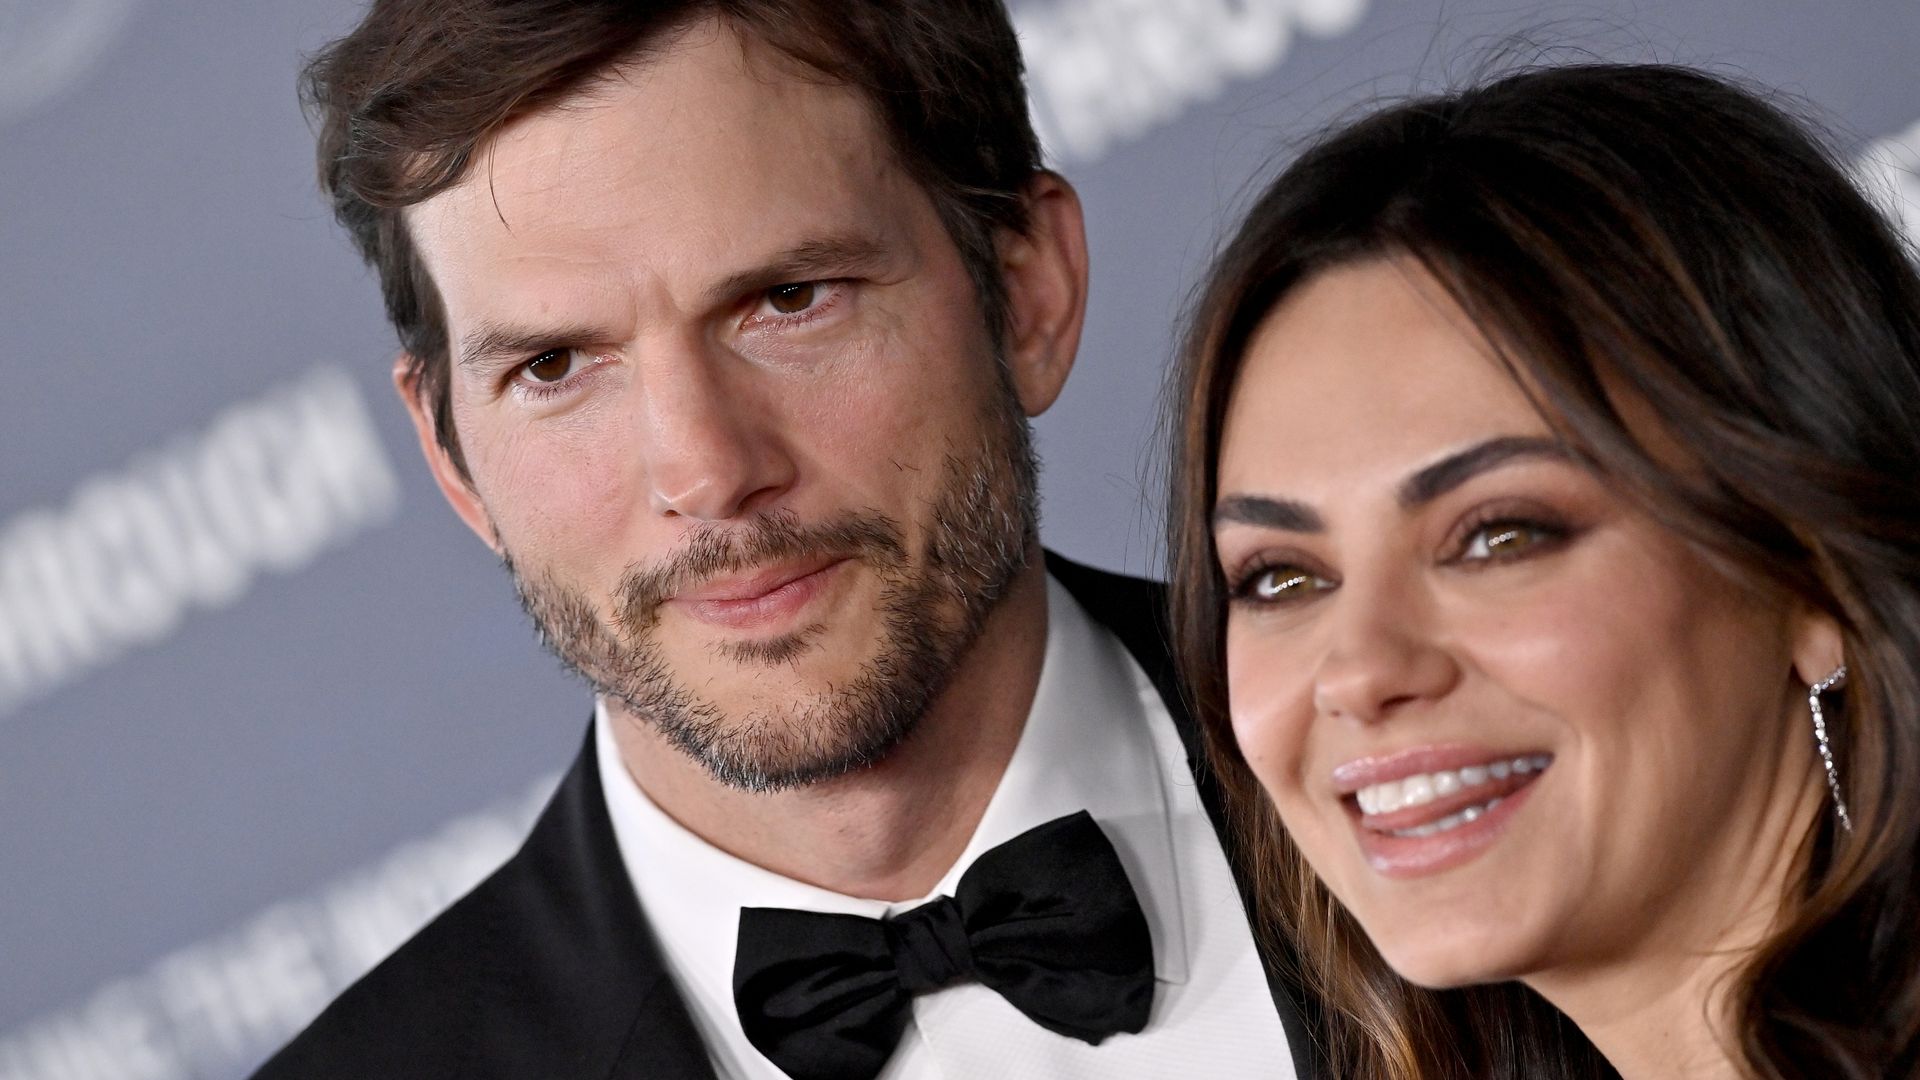 Ashton Kutcher and Mila Kunis issue public apology following Danny Masterson controversy